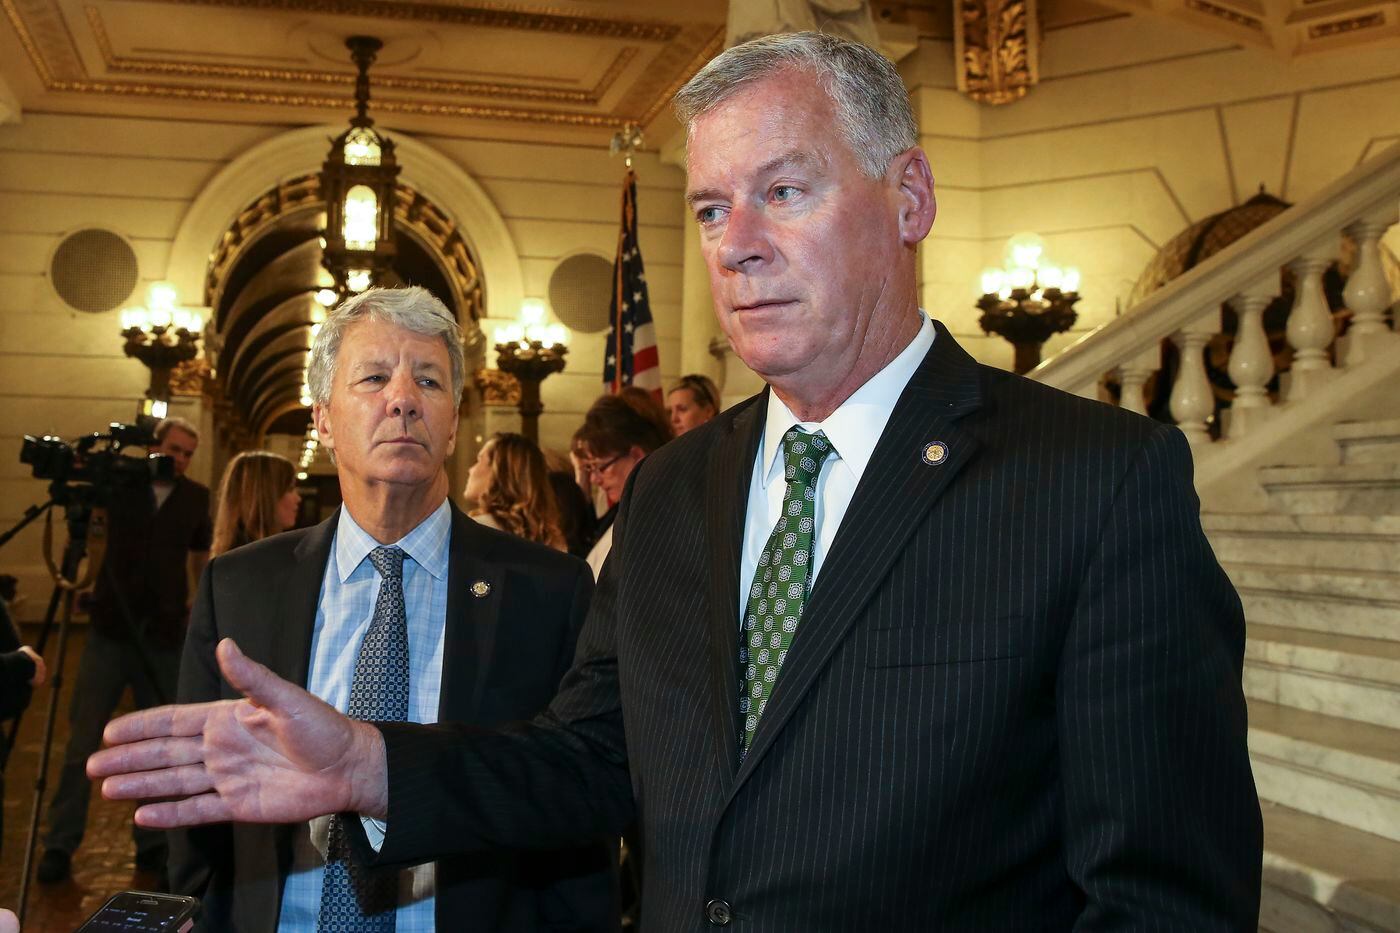 Republican State Sen. Tom Killion (left) and Tom McGarrigle, both of Delaware County, said they were frustrated that they were not given the opportunity to vote on a bill to let child sex-abuse victims sue the Catholic Church. McGarrigle is up for reelection next month.